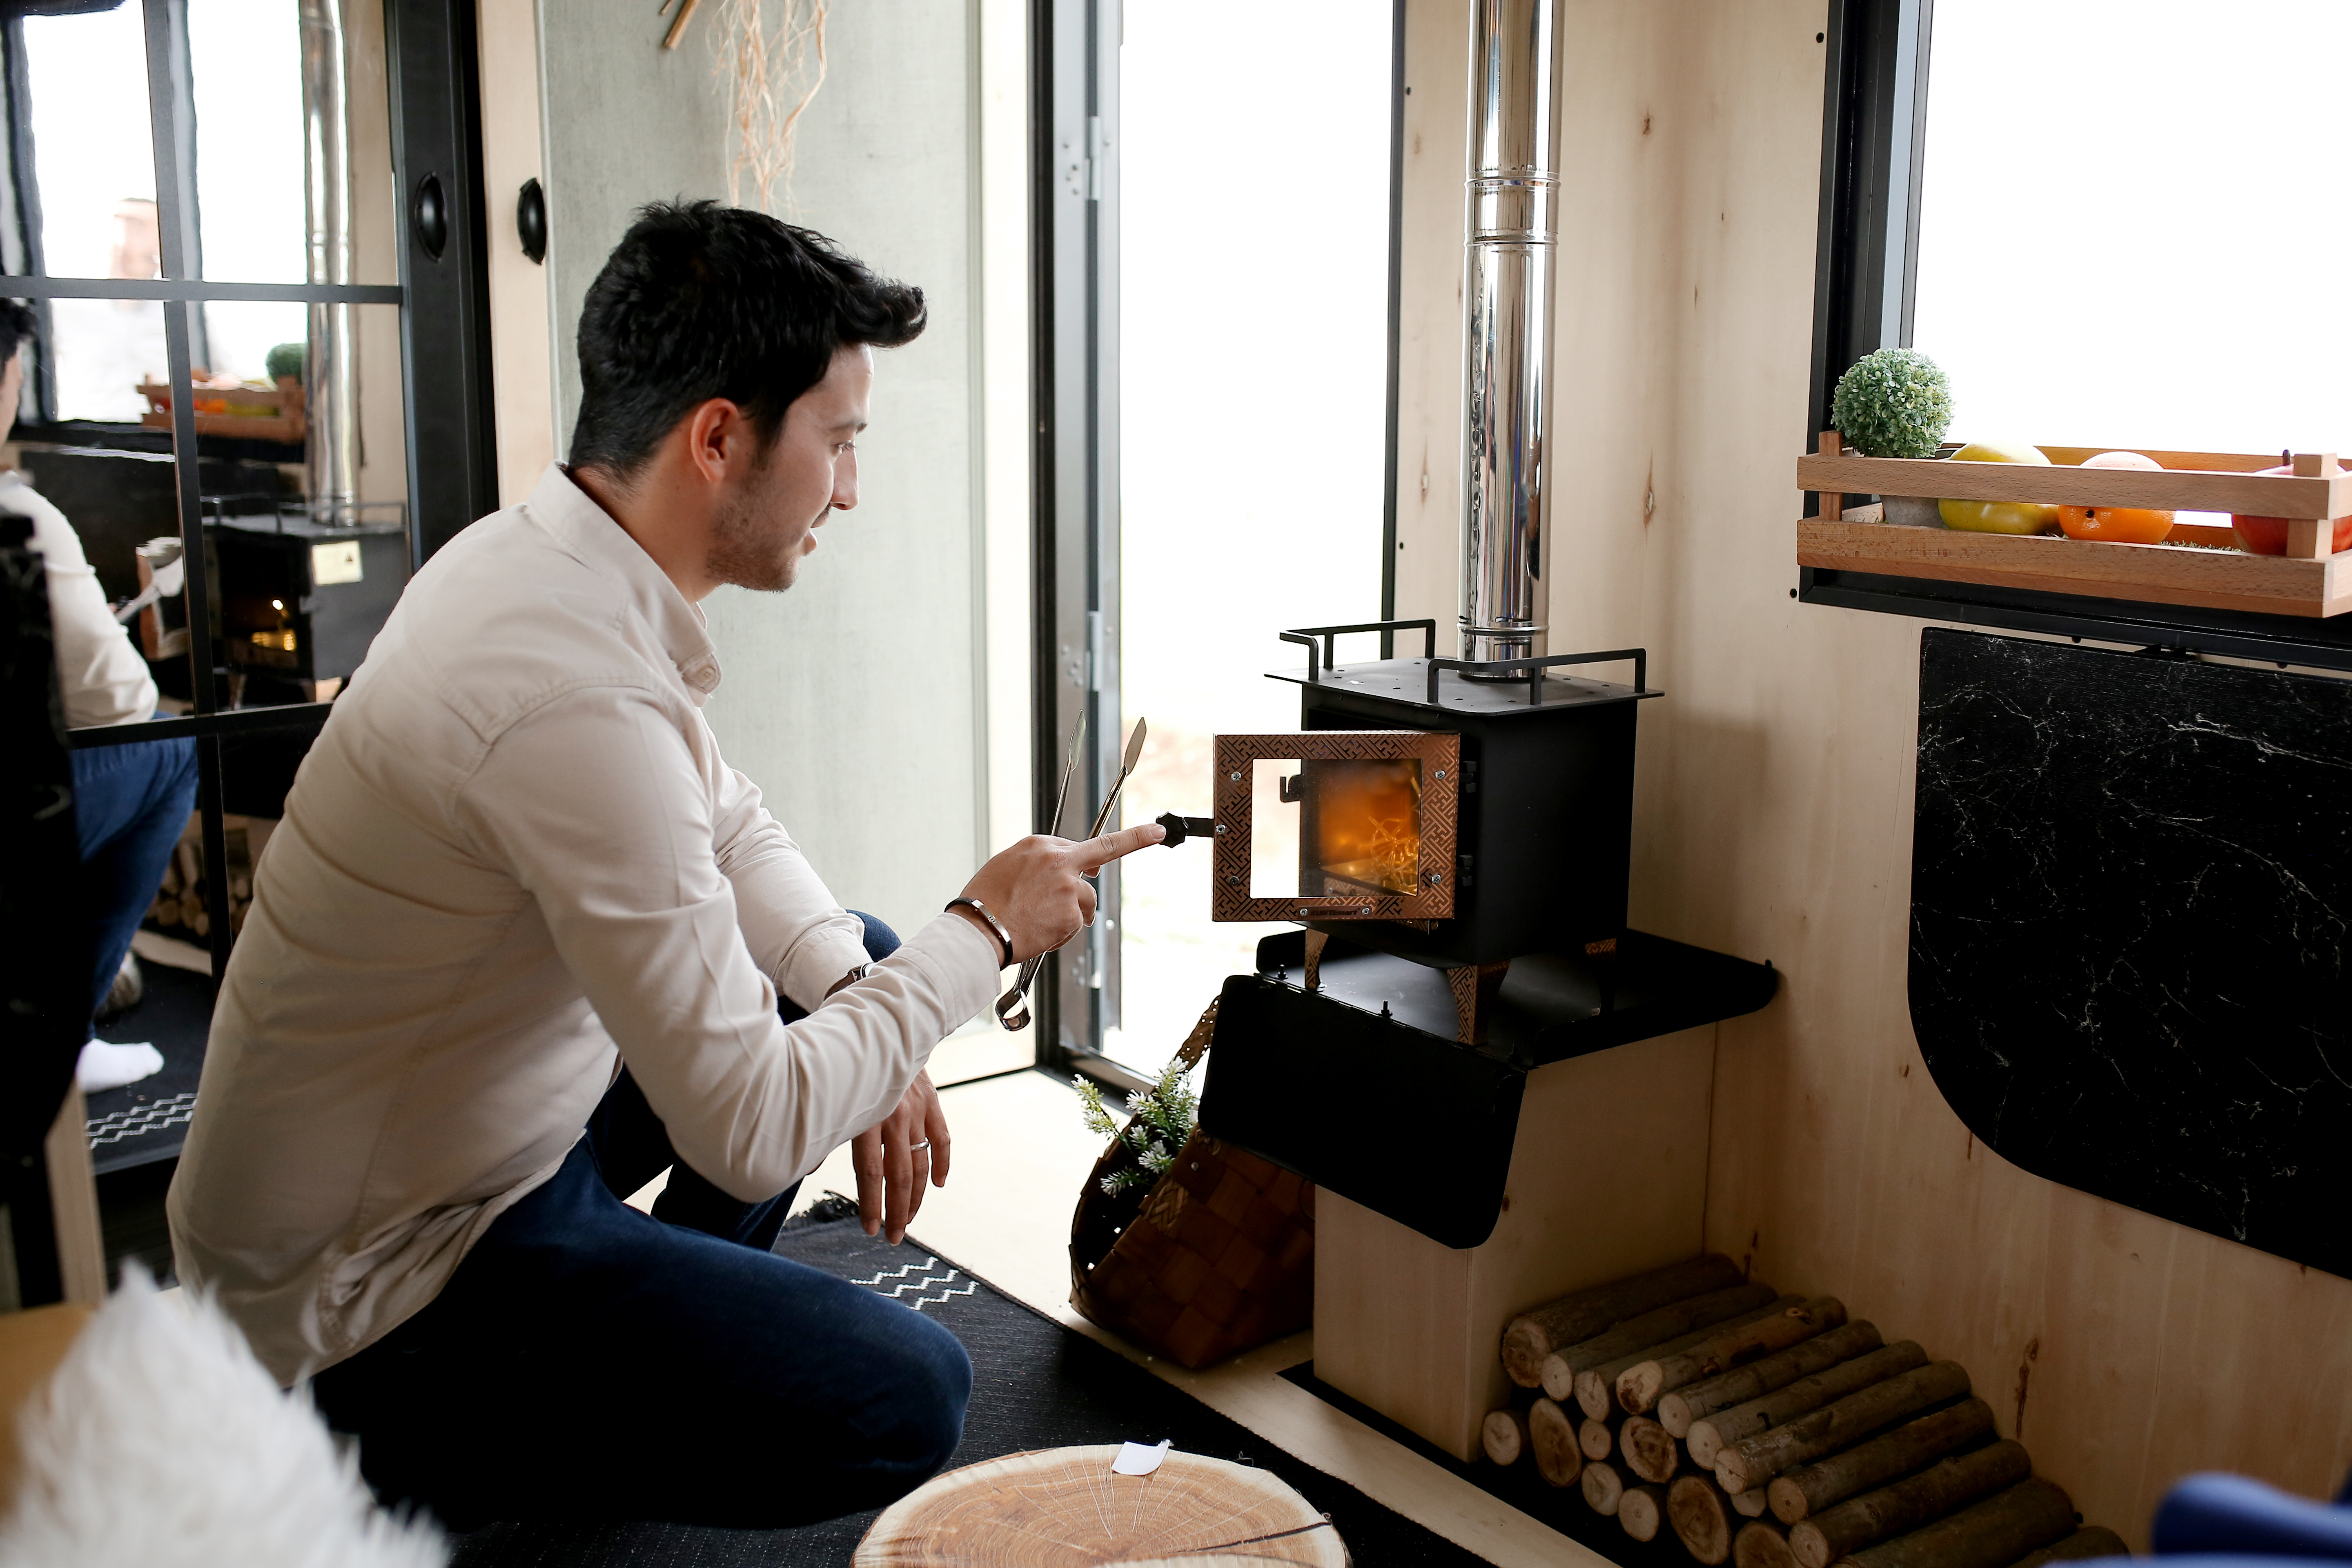 A man managing a small pizza oven indoor chiminea